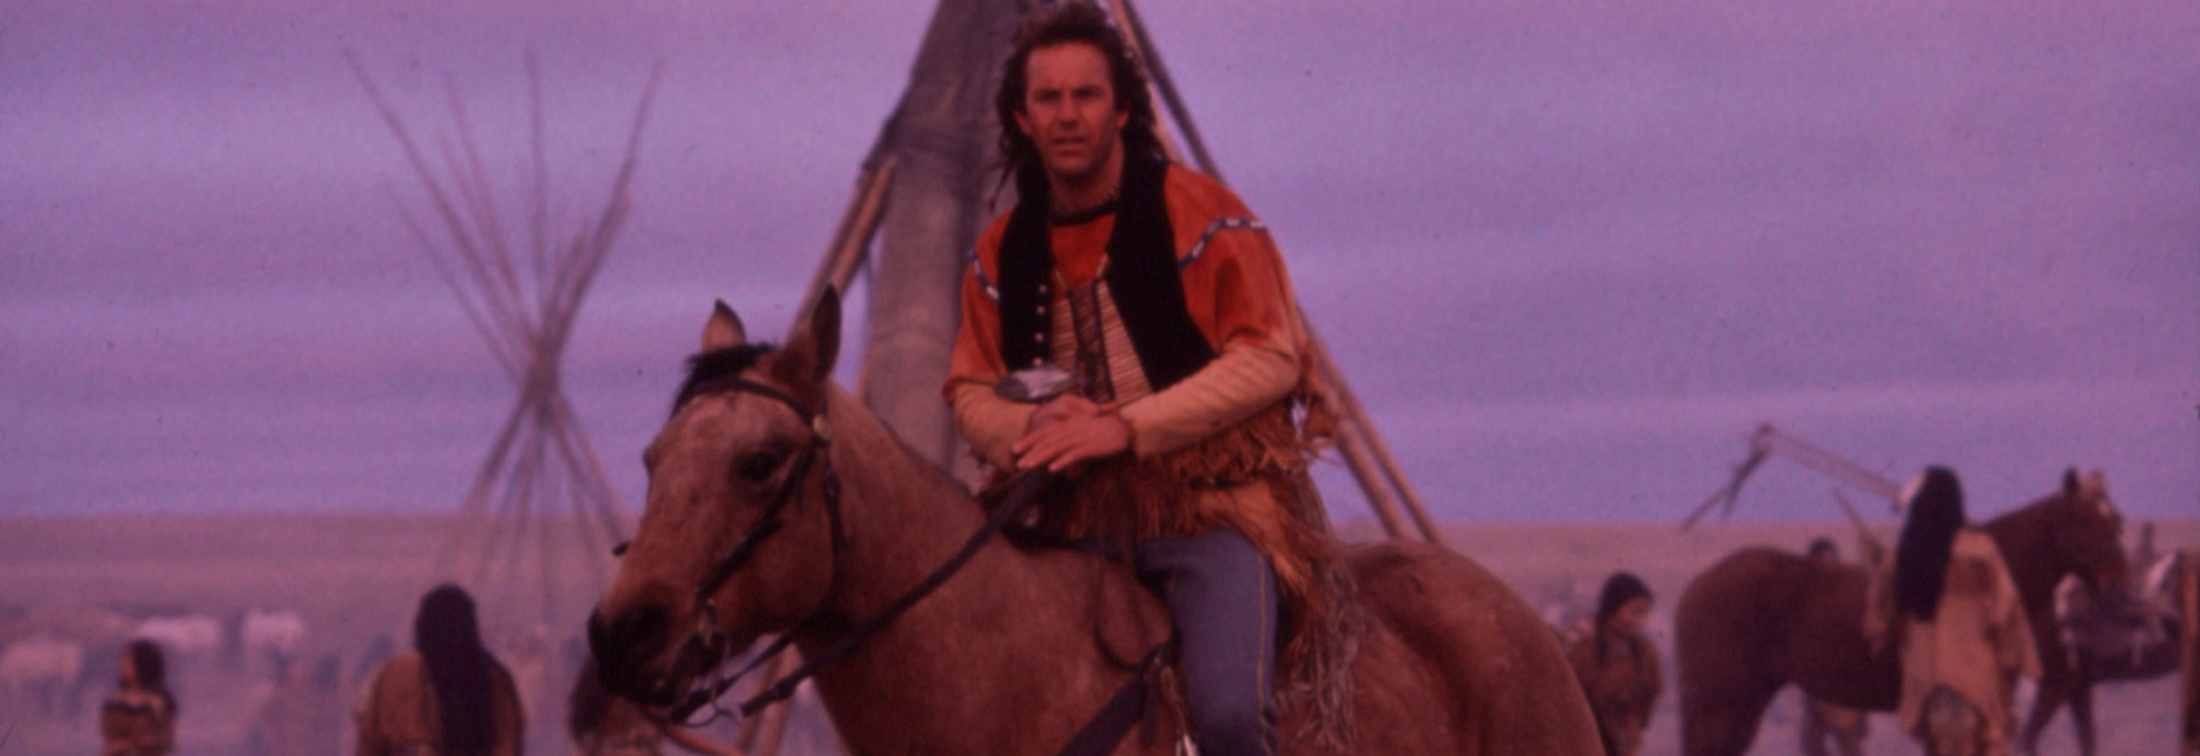 Dances With Wolves - Collector's Edition for the seven-time Oscar-winning masterpiece